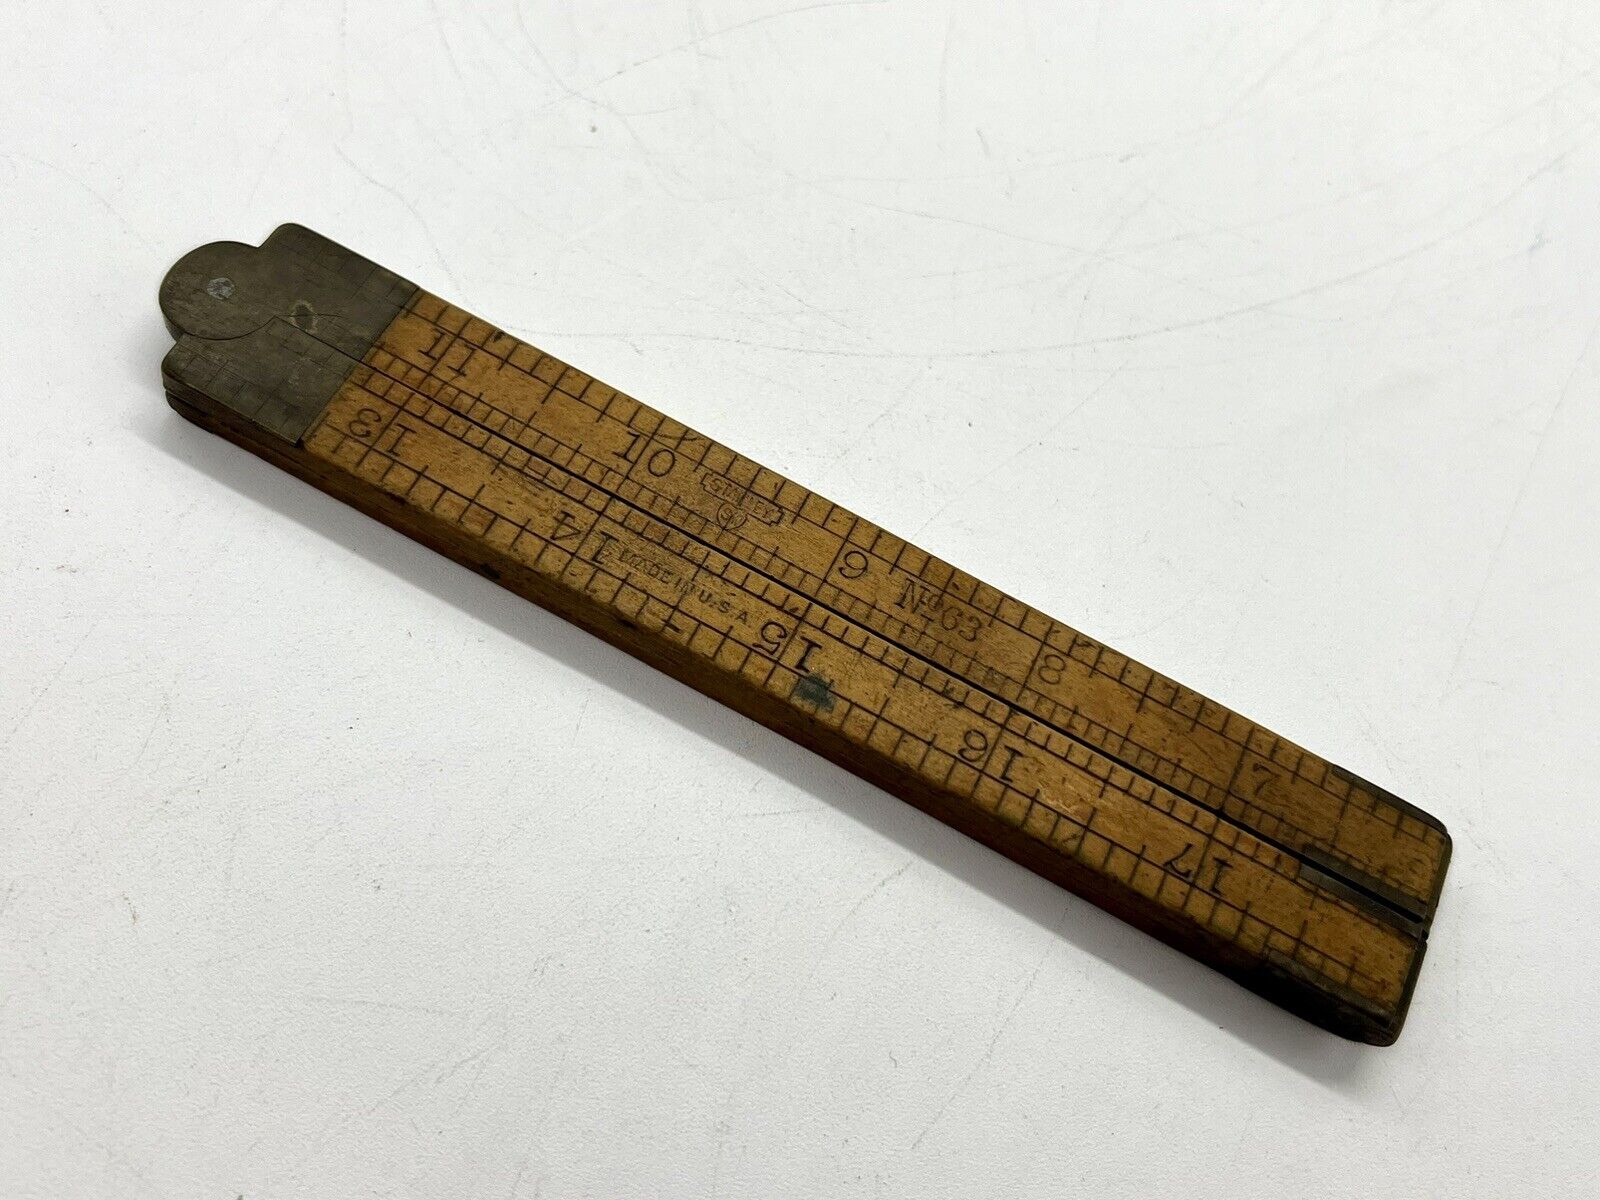 Vintage Stanley No. 63 Folding Ruler-Boxwood in Nice Condition 24”